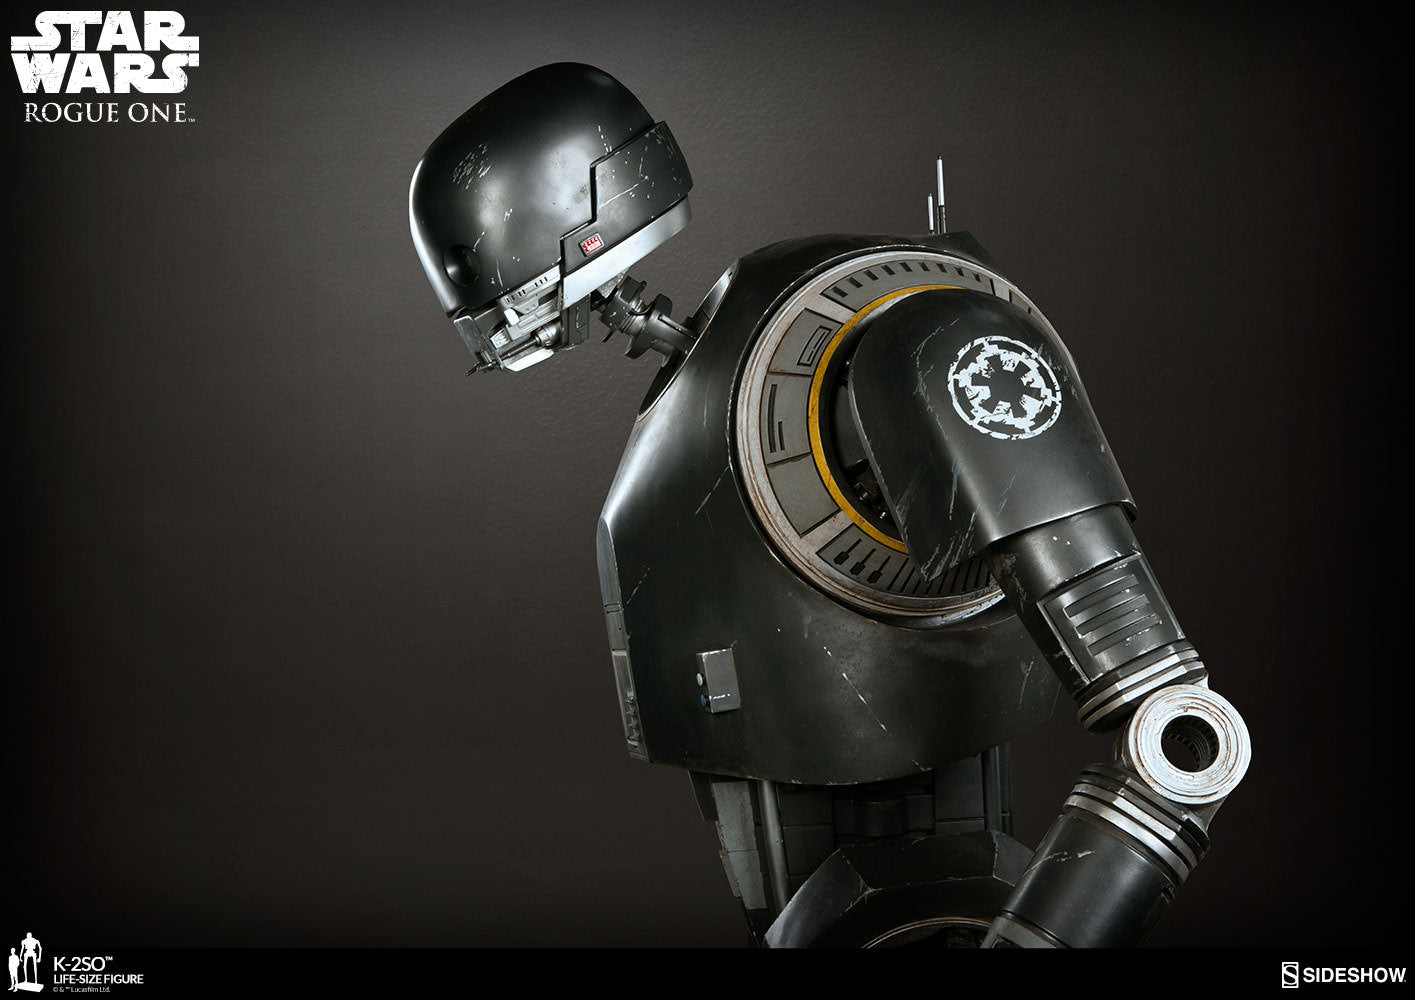 Sideshow Collectibles - Life-Size Figure - Rogue One: A Star Wars Story - K-2SO